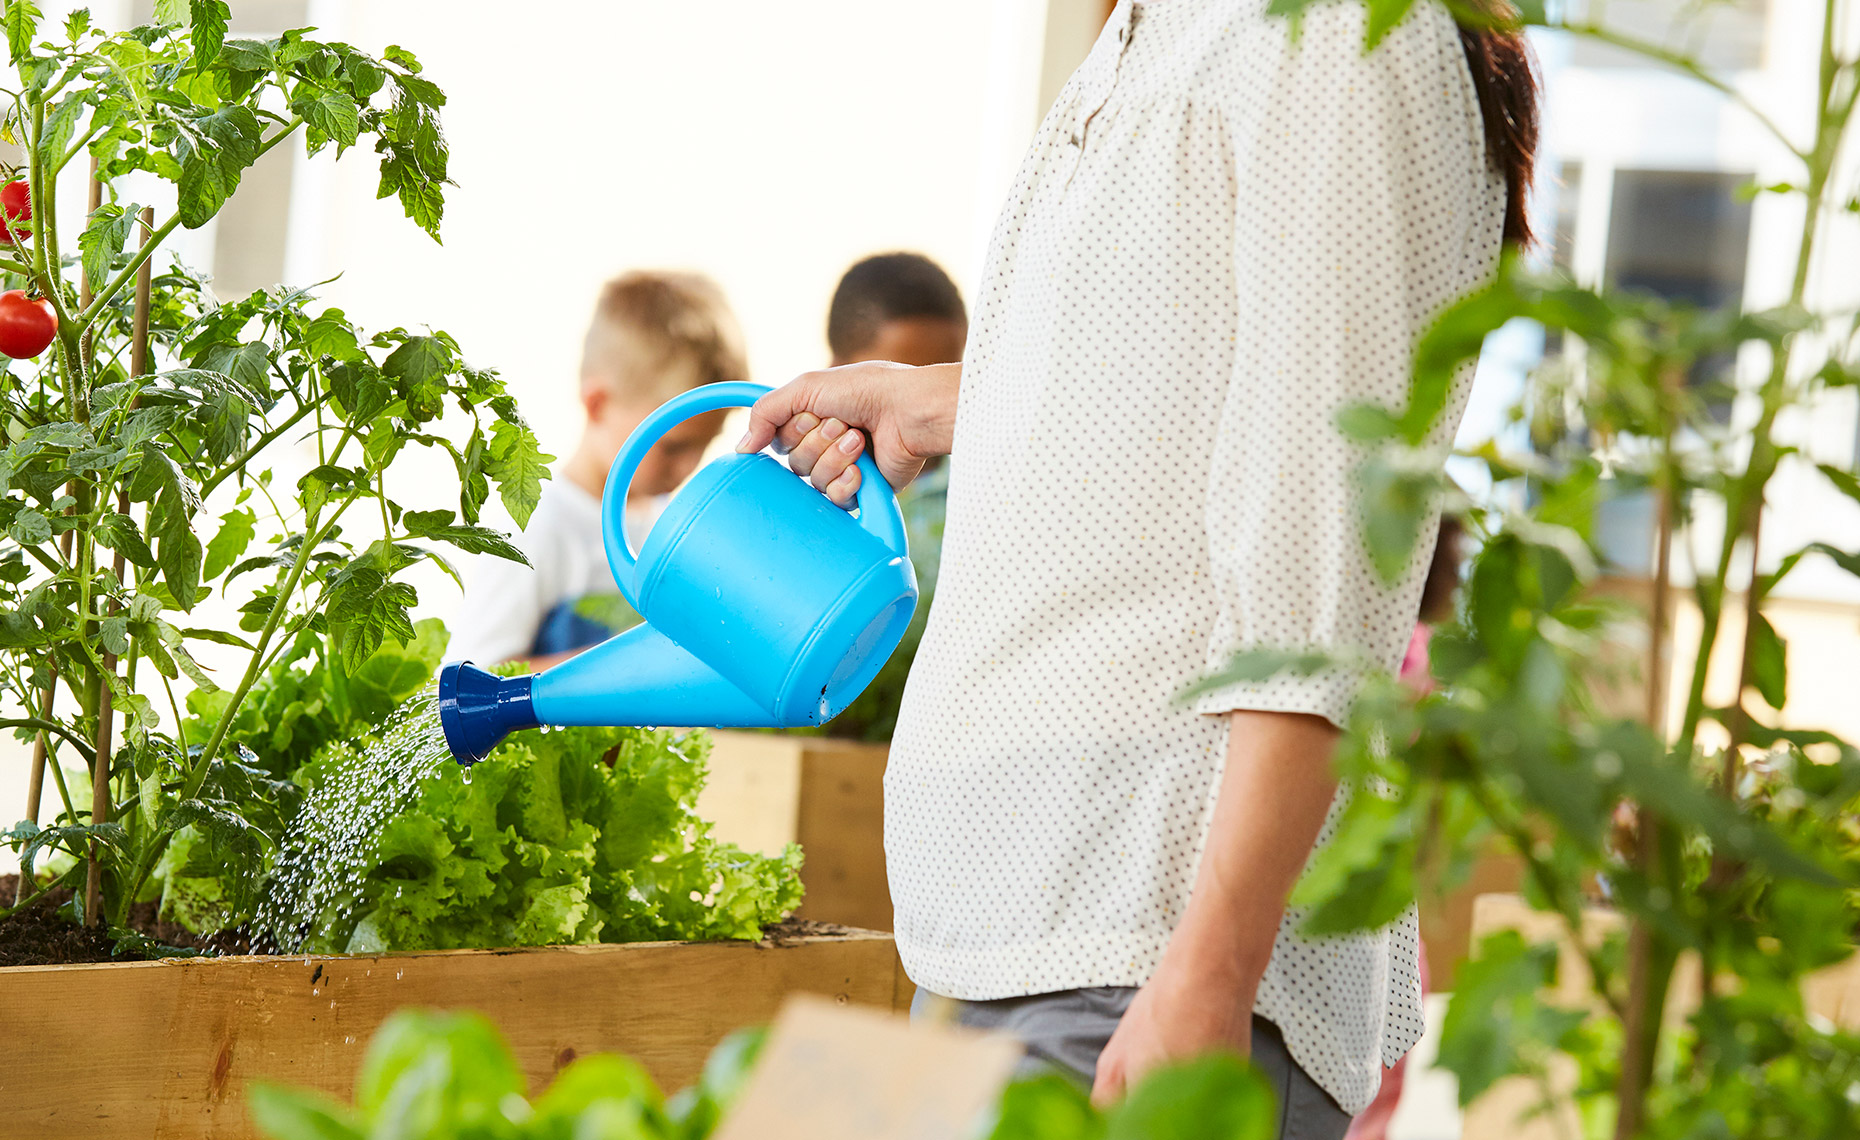 Teacher using  a water can on the tomato plants in the school garden.